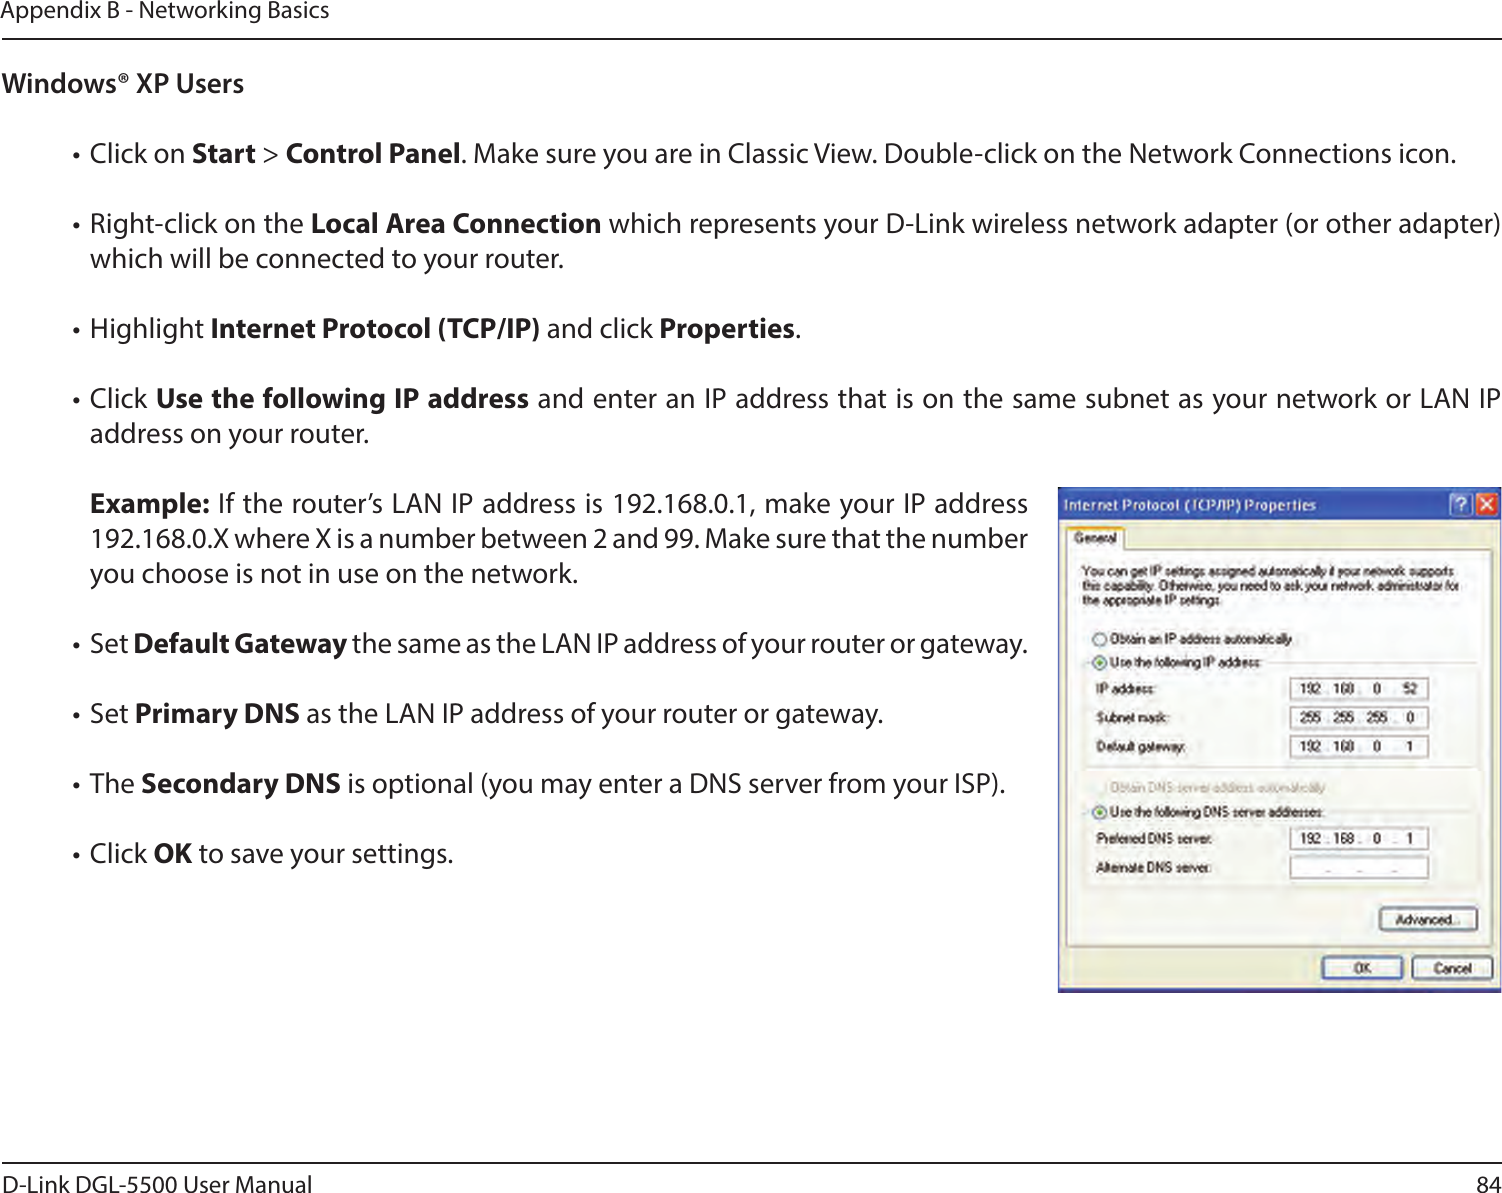 84D-Link DGL-5500 User ManualAppendix B - Networking BasicsWindows® XP Users• Click on Start &gt; Control Panel. Make sure you are in Classic View. Double-click on the Network Connections icon. • Right-click on the Local Area Connection which represents your D-Link wireless network adapter (or other adapter) which will be connected to your router.• Highlight Internet Protocol (TCP/IP) and click Properties.• Click Use the following IP address and enter an IP address that is on the same subnet as your network or LAN IP address on your router. Example: If the router’s LAN IP address is 192.168.0.1, make your IP address 192.168.0.X where X is a number between 2 and 99. Make sure that the number you choose is not in use on the network. • Set Default Gateway the same as the LAN IP address of your router or gateway.• Set Primary DNS as the LAN IP address of your router or gateway. • The Secondary DNS is optional (you may enter a DNS server from your ISP).• Click OK to save your settings.